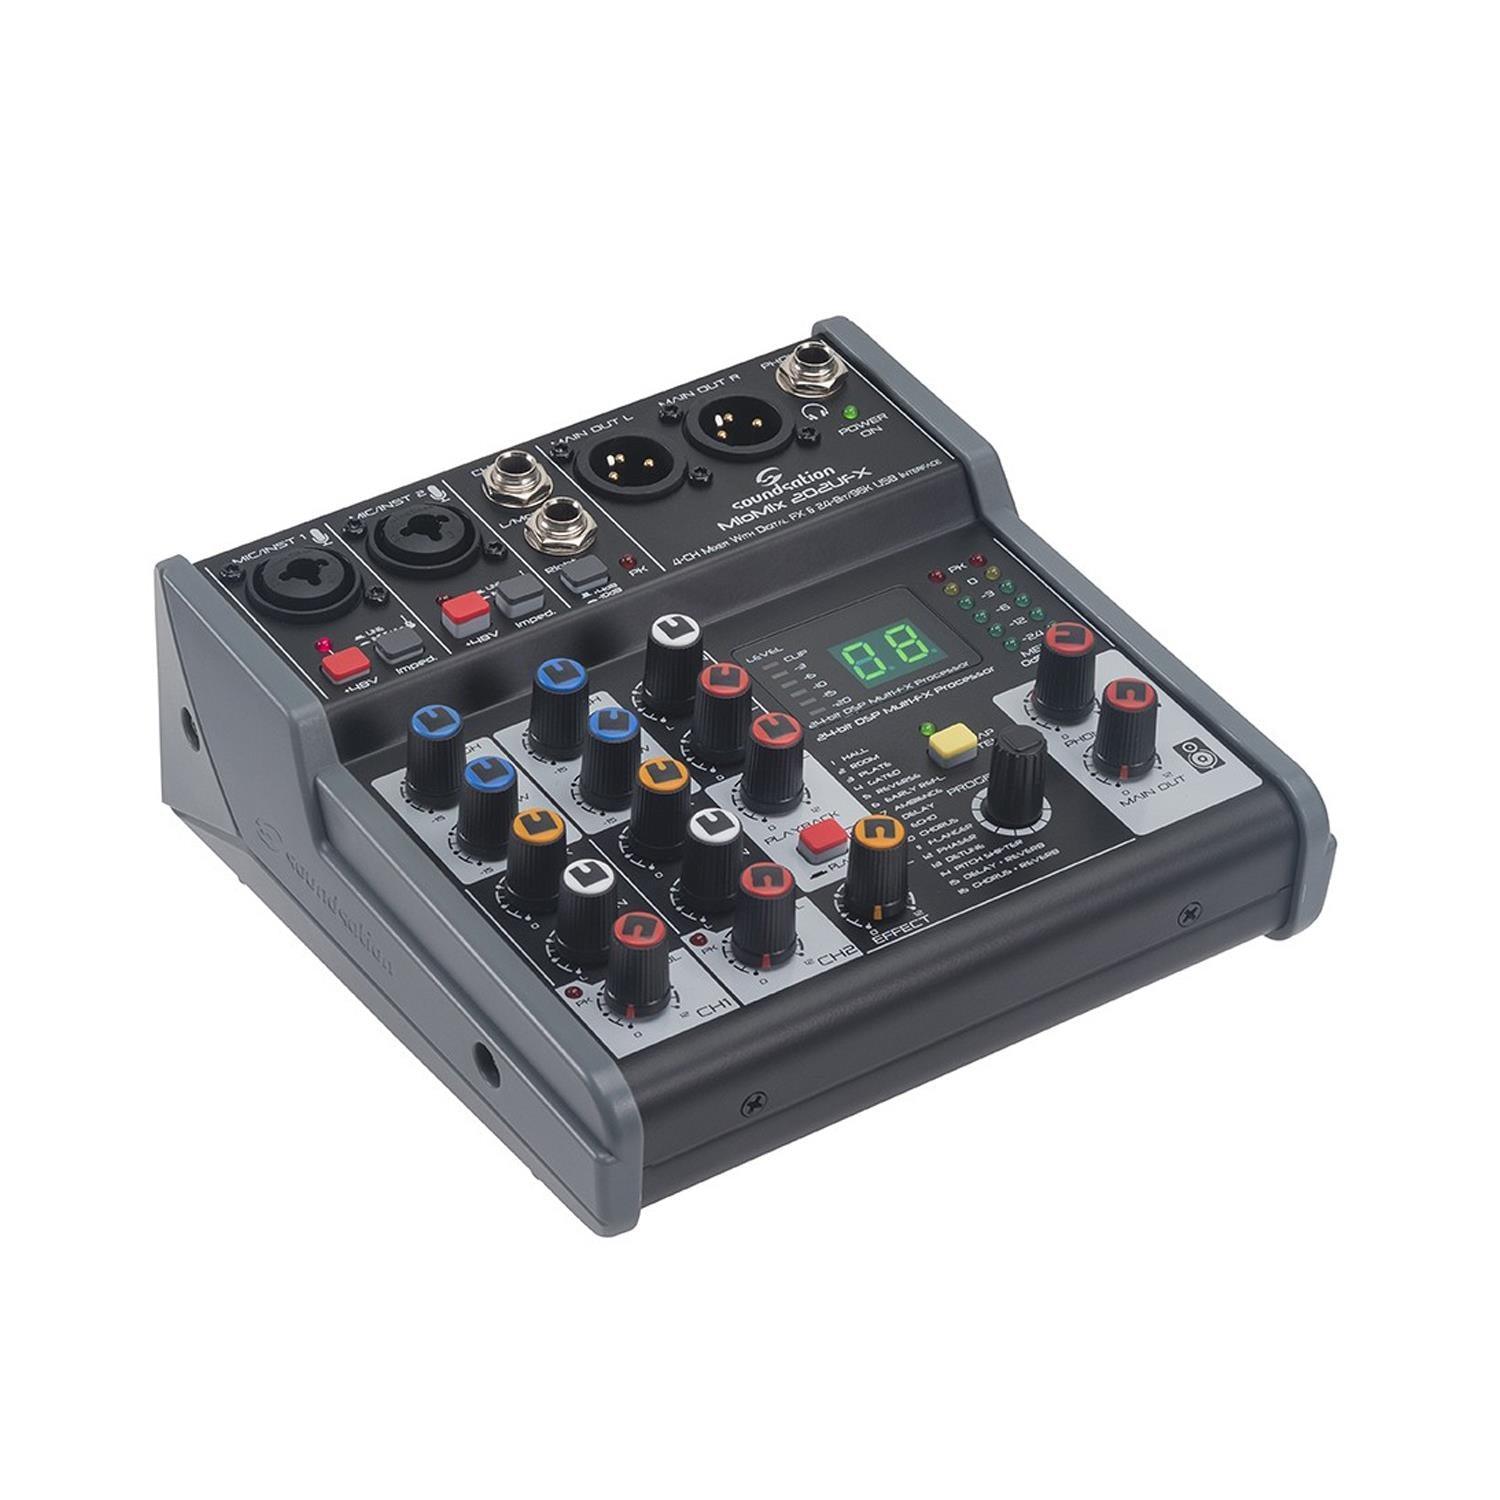 Soundsation MIOMIX 202UFX 4 Channel Mixer with FX and USB - DY Pro Audio